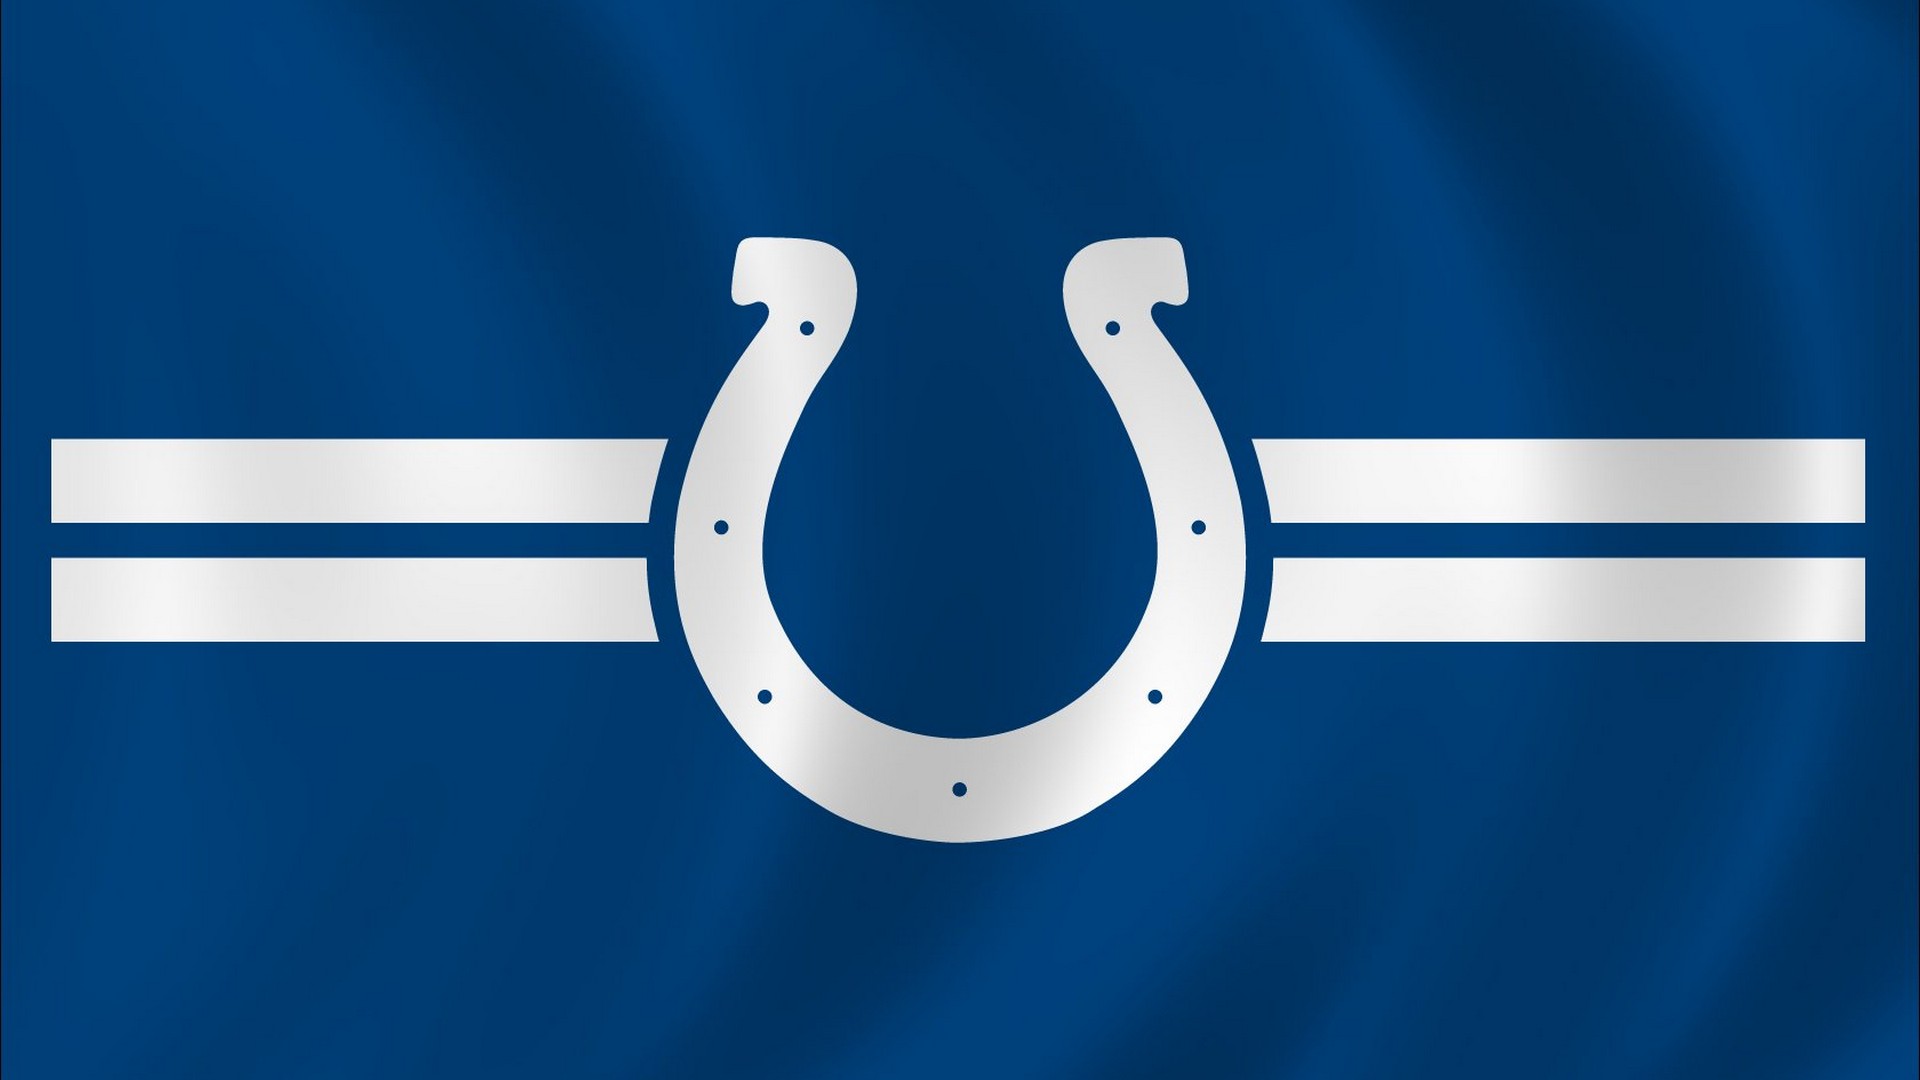 PC Wallpaper Indianapolis Colts With high-resolution 1920X1080 pixel. Download and set as wallpaper for Desktop Computer, Apple iPhone X, XS Max, XR, 8, 7, 6, SE, iPad, Android